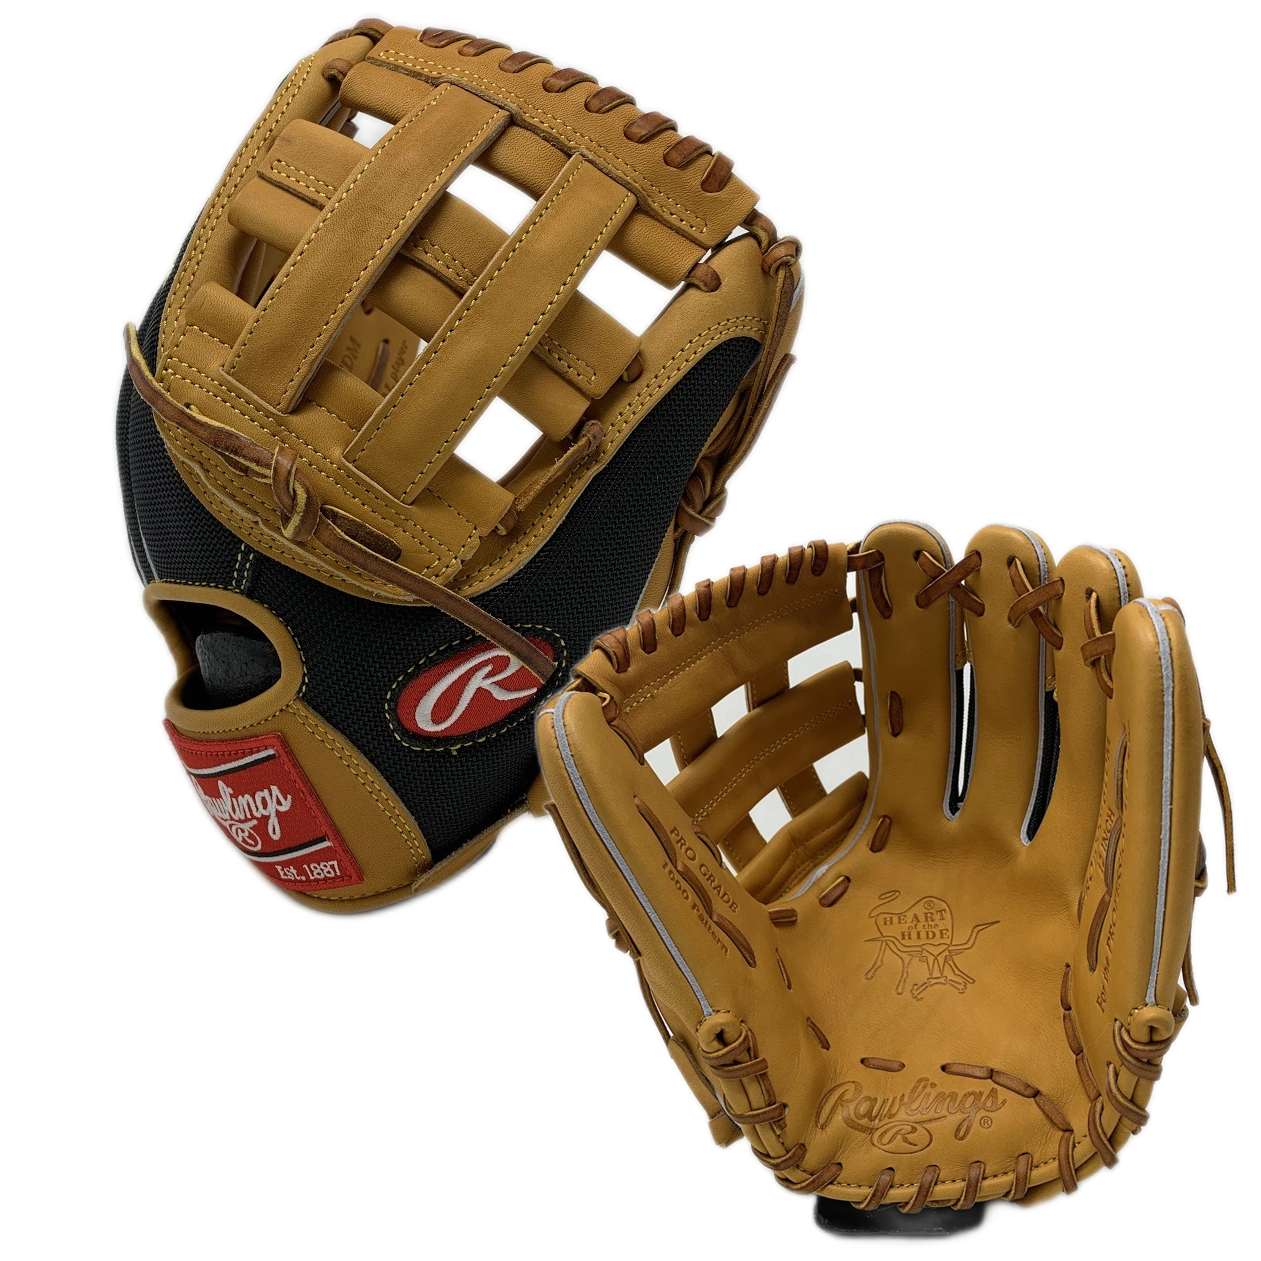   When it comes to baseball gloves, Rawlings is a name that is synonymous with quality and durability. One of their flagship lines is the Heart of the Hide Mesh series, which features gloves made with their best-in-class leather and light-weight mesh backing. This leather is not only durable, but it is also lightweight, making it a popular choice among players who want to have more control and speed with their glove.   One of the key features of this series of Heart of the Hide is the premium leather cap finger tips. These finger tips are designed to preserve the shape of the glove and extend its life. This is achieved by reinforcing the tips of the fingers, which are typically the first areas to wear down on a glove. The result is a glove that maintains its shape and performs like new for longer.   Another unique feature of the Heart of the Hide series is the Rawlings patented deerskin liner. This liner is designed for a comfortable feel on the hand and is made from cowhide that has been tanned using a special process. This liner is also thermoformed, which means that it has been shaped using heat. This process not only makes the liner more comfortable, but it also helps to wick away moisture and makes it easier to clean and maintain.   The Heart of the Hide series also features padded thumb loops, which are tailored to appeal to the classic glove connoisseur as well as all players. These padded thumb loops provide added comfort and are a preferred alternative to the traditional leather thumb loops inside the glove.   Another feature of this Heart of the Hide series is the mesh back on the back of the gloves. This mesh back makes the gloves 15% lighter, which is preferred by players who want more control and speed with their glove.   The Heart of the Hide Mesh series by Rawlings offers a combination of durability, comfort, and style. With features such as premium leather cap finger tips, Rawlings patented deerskin liner, padded thumb loops, and a mesh back, these gloves are designed to perform at the highest level while also providing a comfortable and secure fit. Whether you are a classic glove connoisseur or a player looking for a top-of-the-line glove, the Heart of the Hide series is an excellent choice.   Constructed from Rawlings' world-renowned Heart of the Hide steer leather and deco mesh back. Rawlings patented deerskin liner for a comfortable feel on the hand and thermoformed wrist which both wicks away moisture and is easy to clean/maintain. Premium leather cap finger tips to preserve the shape of the glove and extend the life of the glove.  12 Inch  Pro H Web  Deco Mesh Back  1000 Pattern Deer Tanned Cowhide Lining Padded Thumb Thermoformed Wrist Pad       